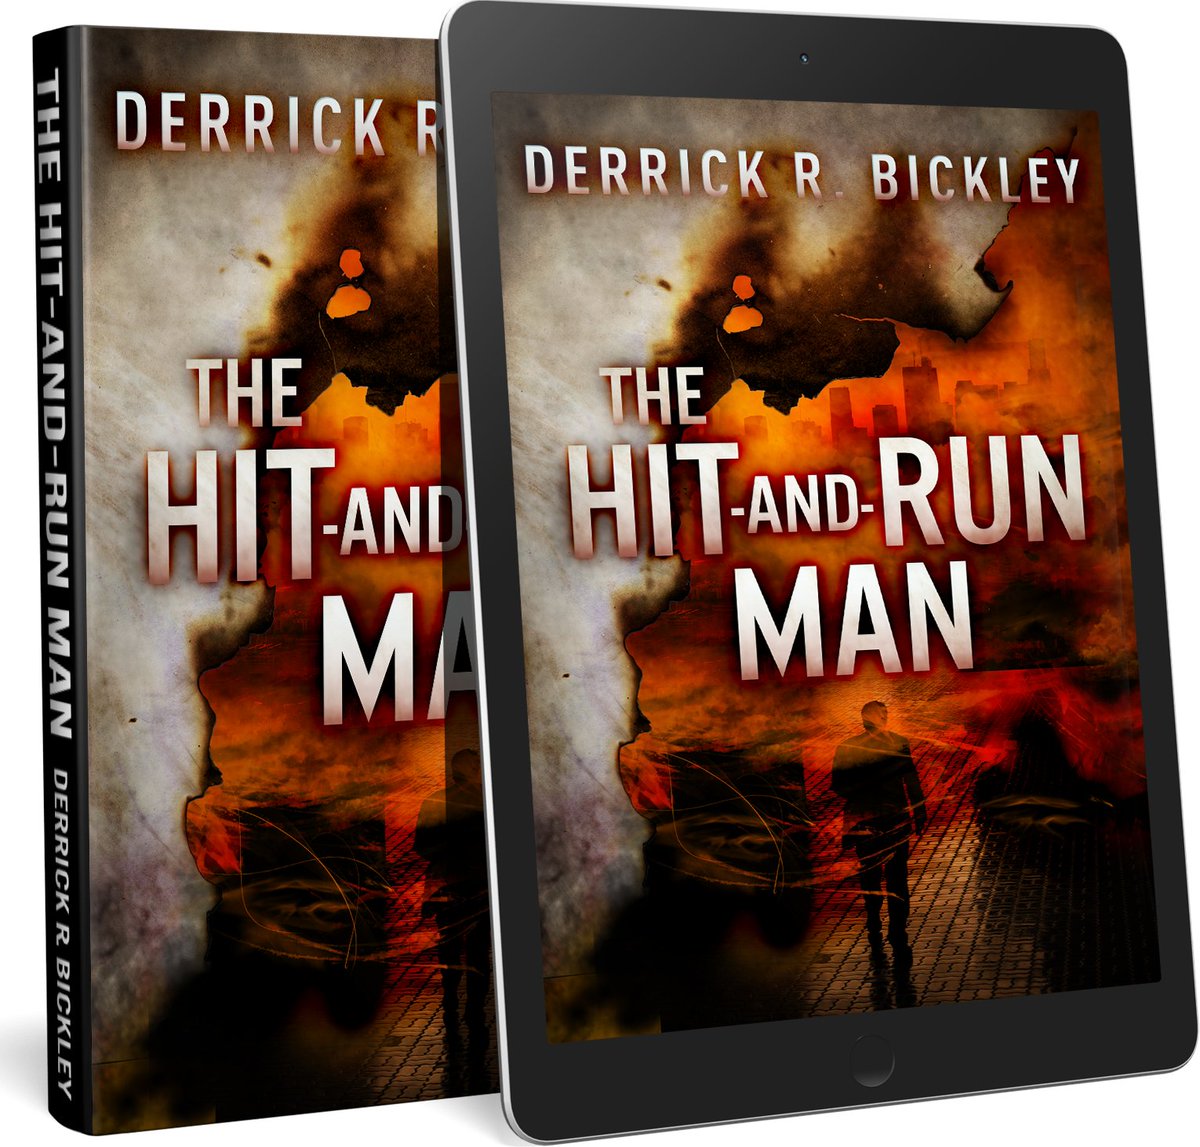 'Gripping opening and plenty of twists and turns meant I couldn't put it down' FIVE/FOUR star mybook.to/TheHitAndRunMan THE HIT-AND-RUN MAN at #Kindle or your favourite digital store  PAPERBACK HARDBACK (Amzn inc L/Print  B&N inc L/Print Wmart) AUDIOBOOK #crimethrillers #crime